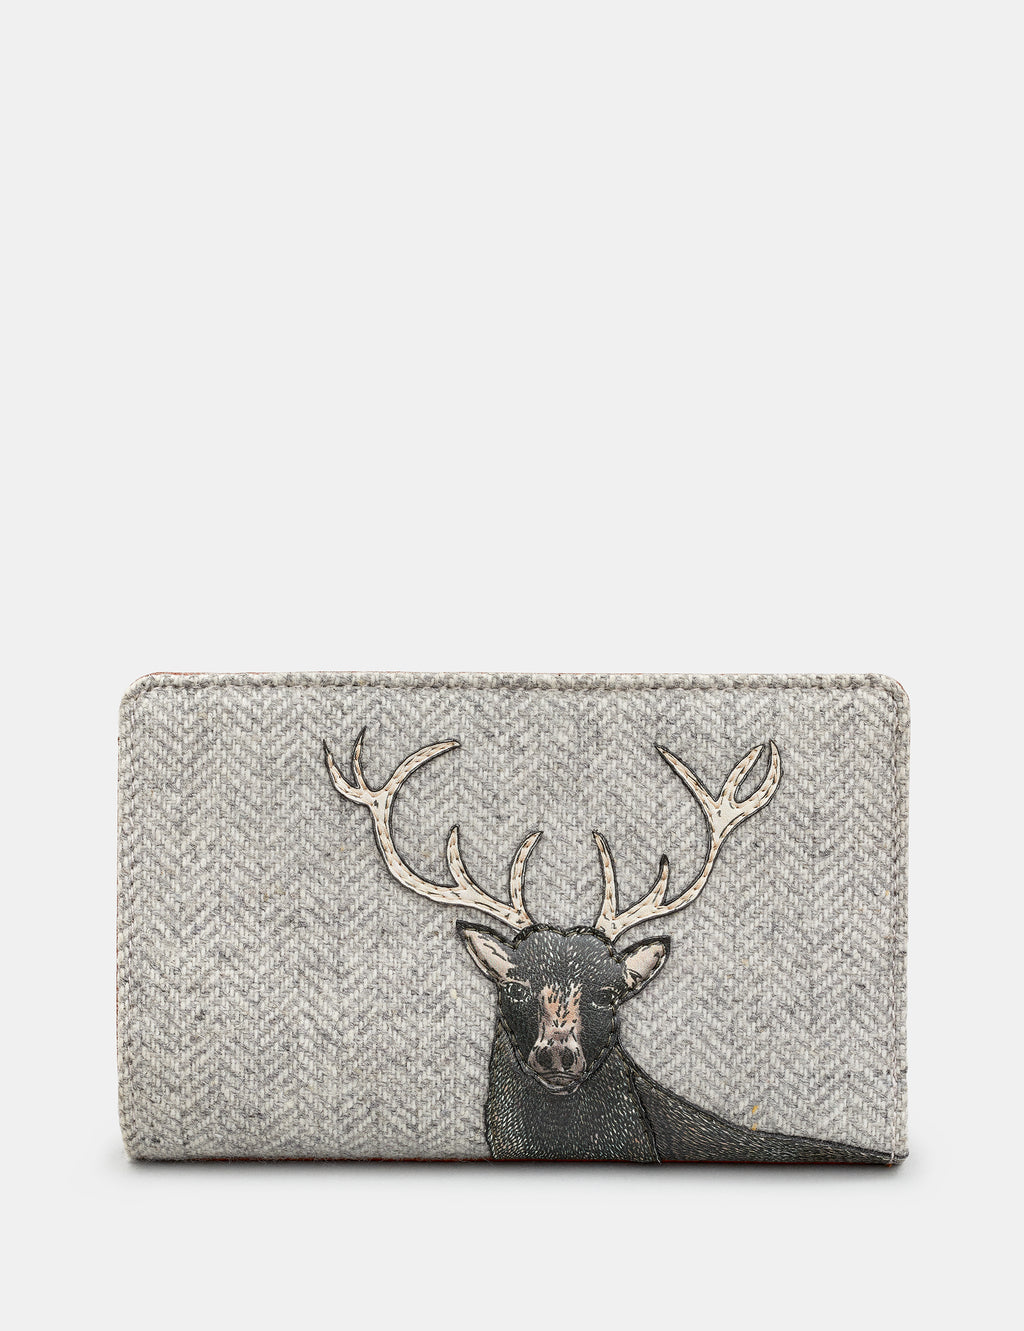 Stag Tweed & Leather Flap Over Zip Around Purse